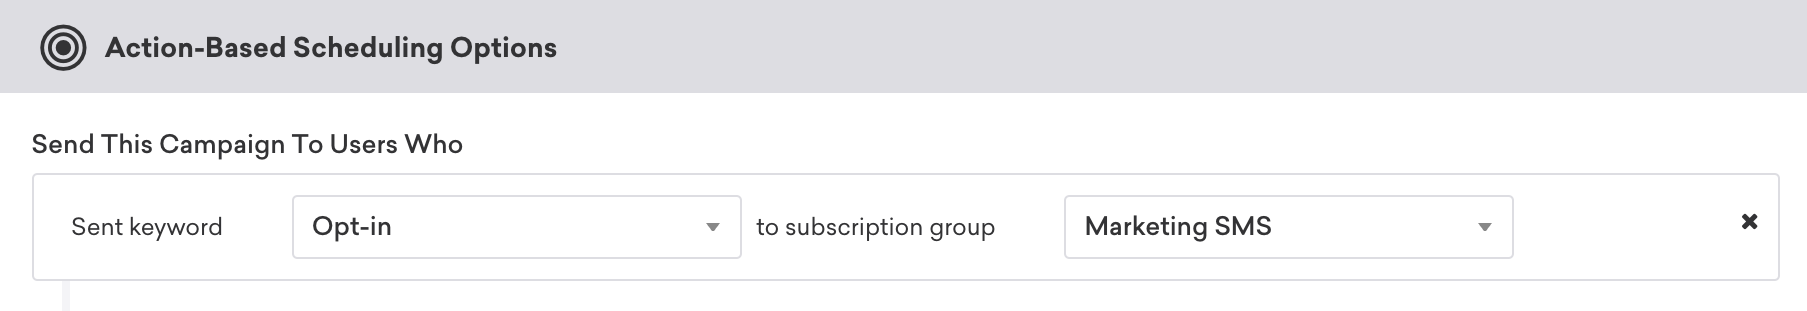 Action-based SMS campaign with the segmentation filter Sent keyword "Opt-in" to subscription group "Marketing SMS".